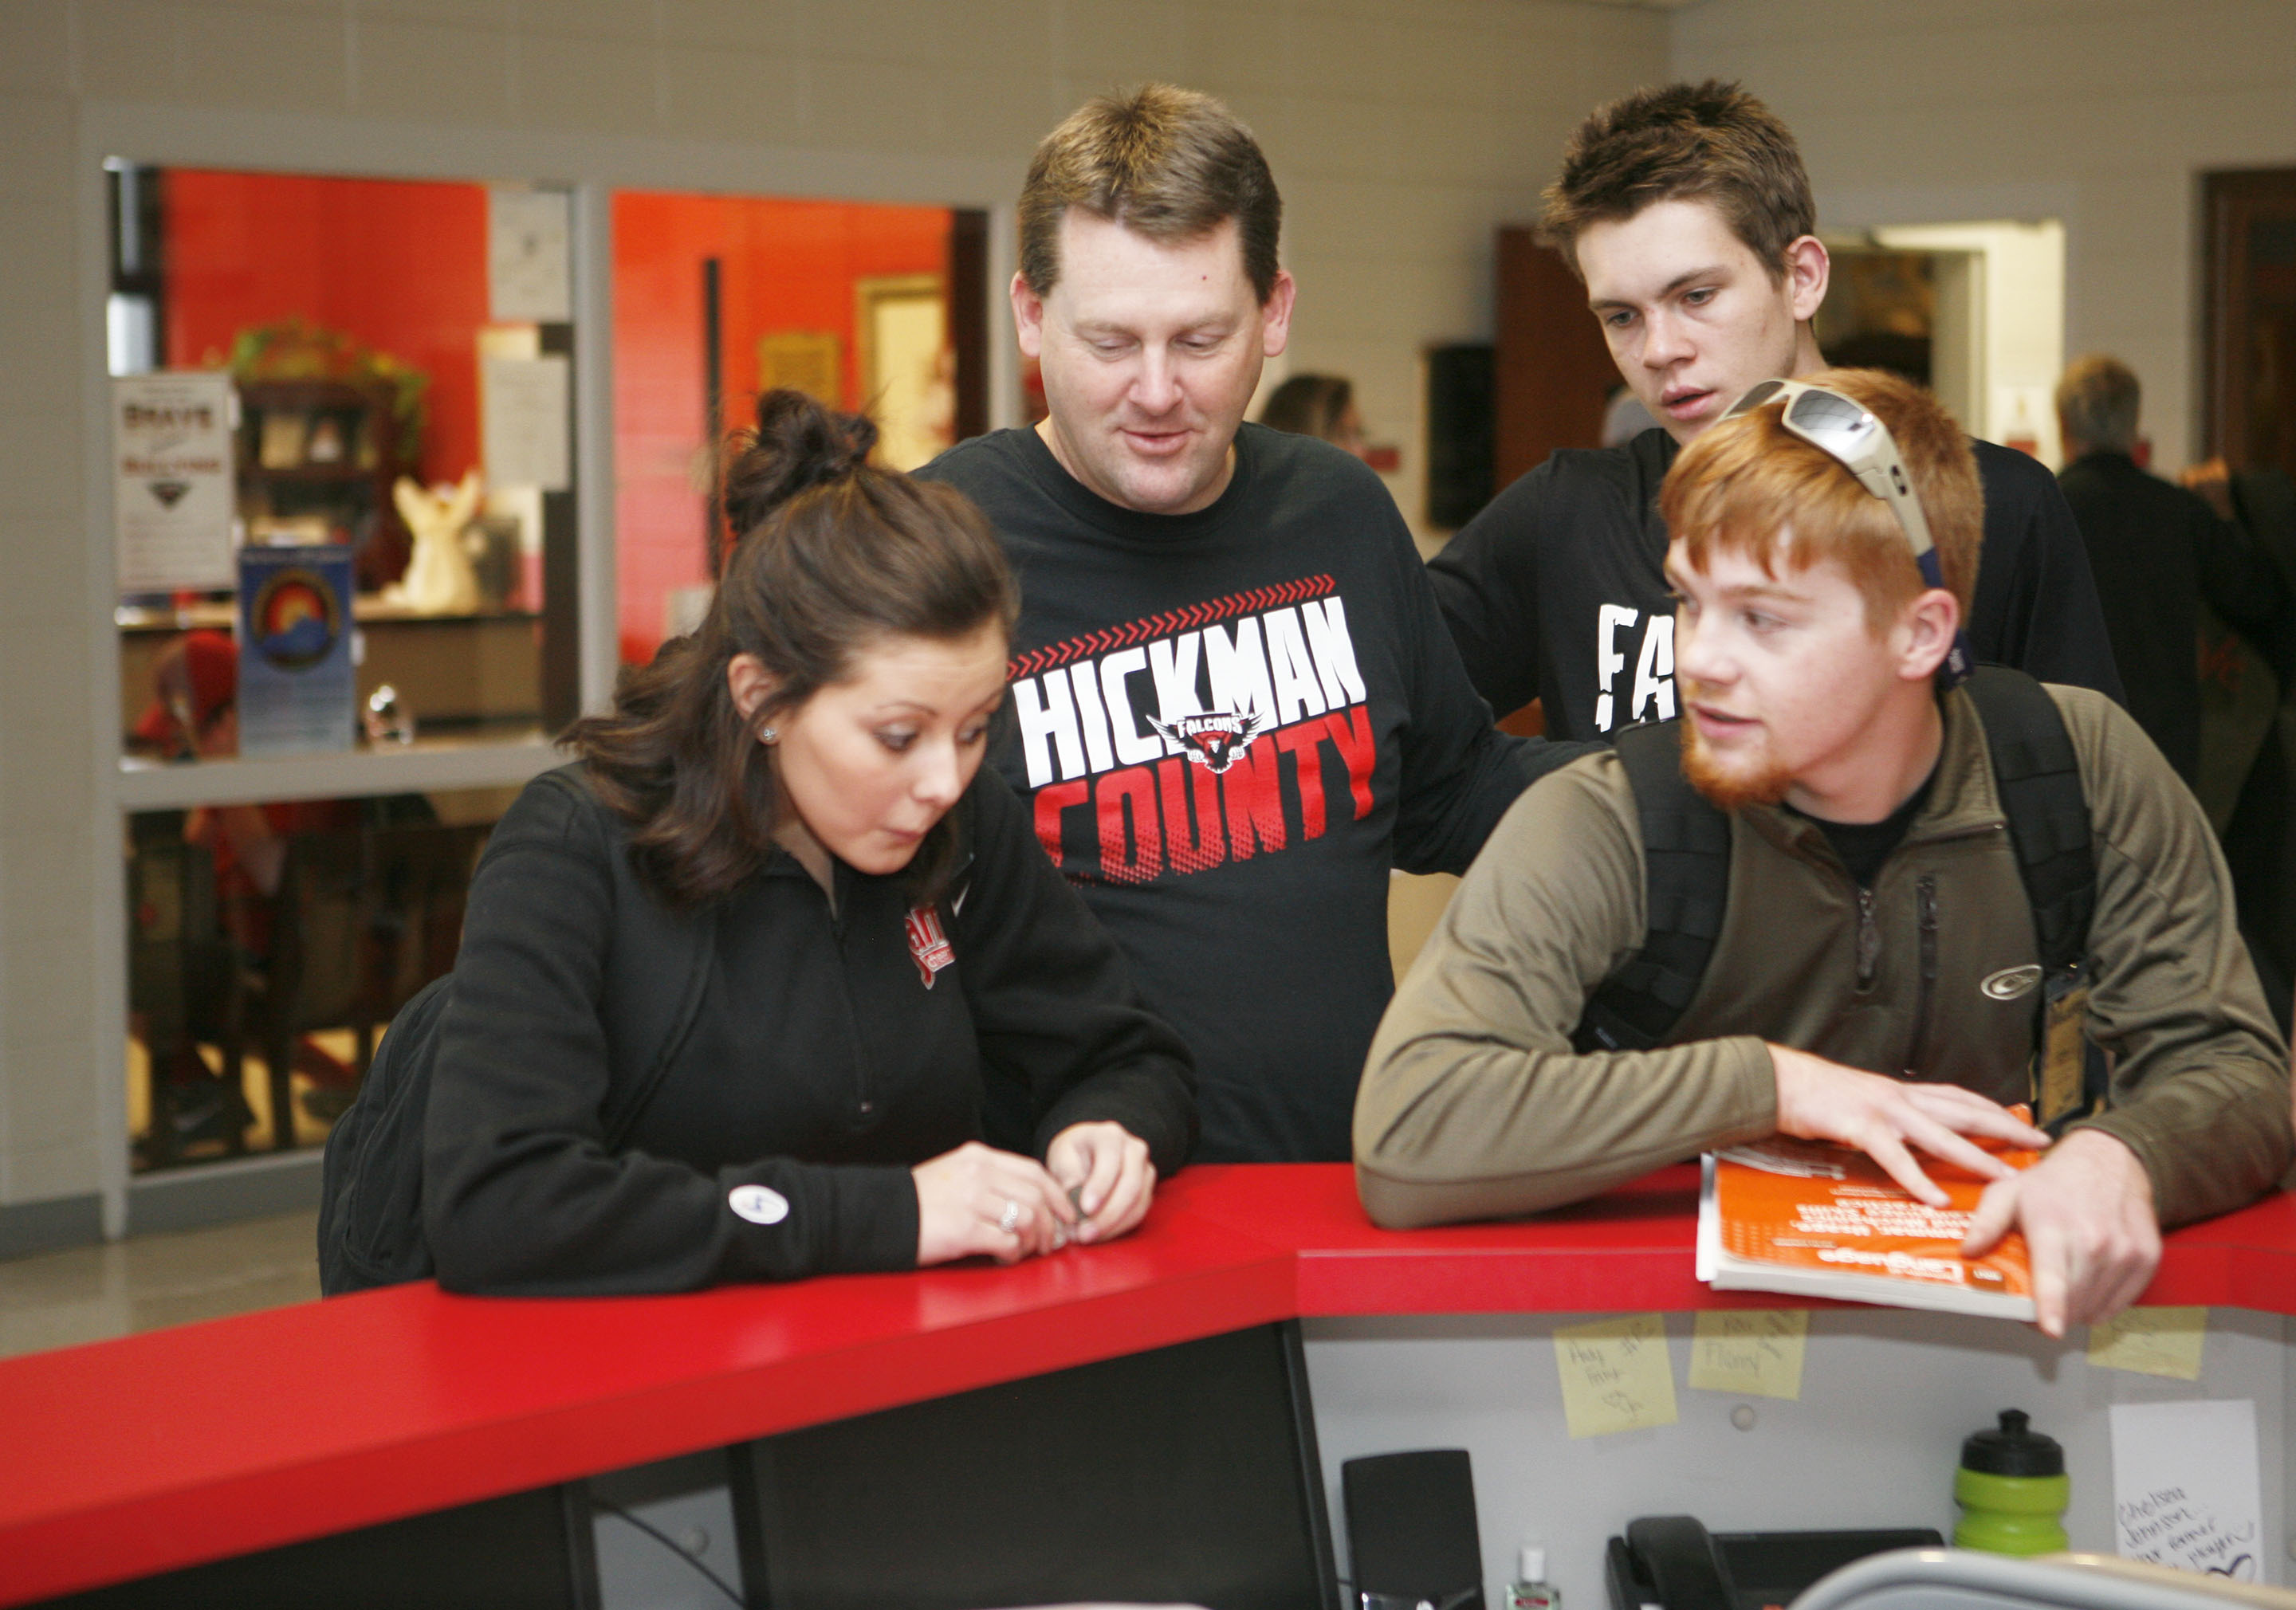 Kevin Estes, the principal at Hickman County High School, talks with students between class periods in the school lobby. Estes also regularly communicates with administrators from around the state while serving as one of the moderates of a weekly Twitter chat for administrators. Photo by Mike Marsee, Dec. 11, 2015